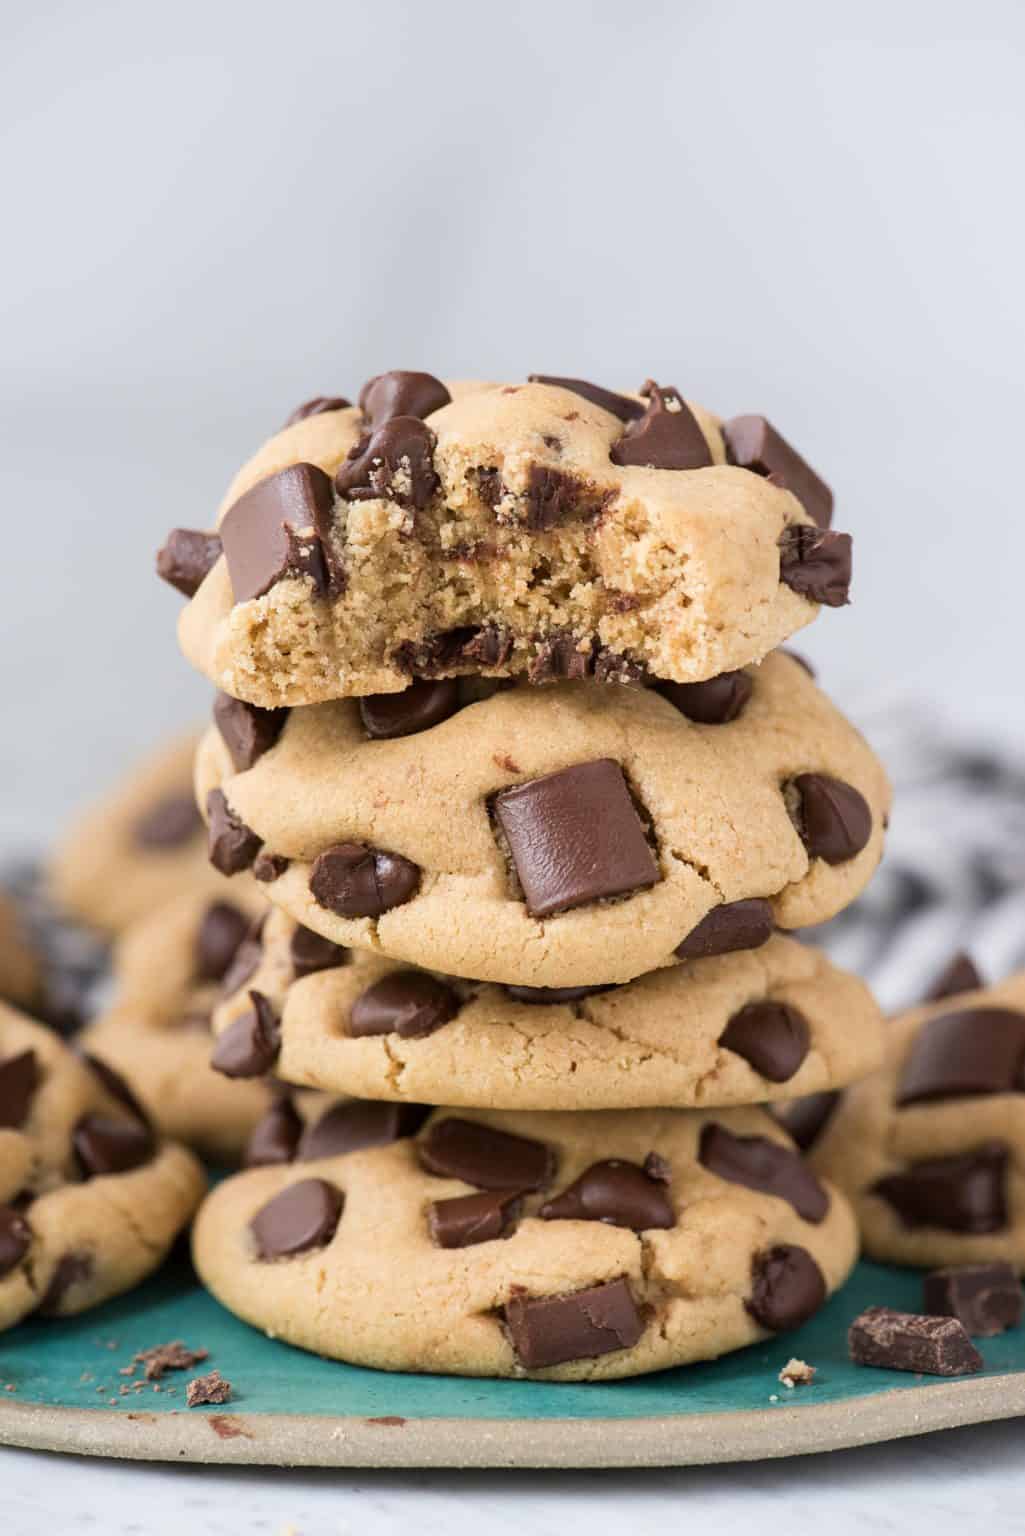 Peanut Butter Chocolate Chip Cookies - 11 ingredients and no chilling!